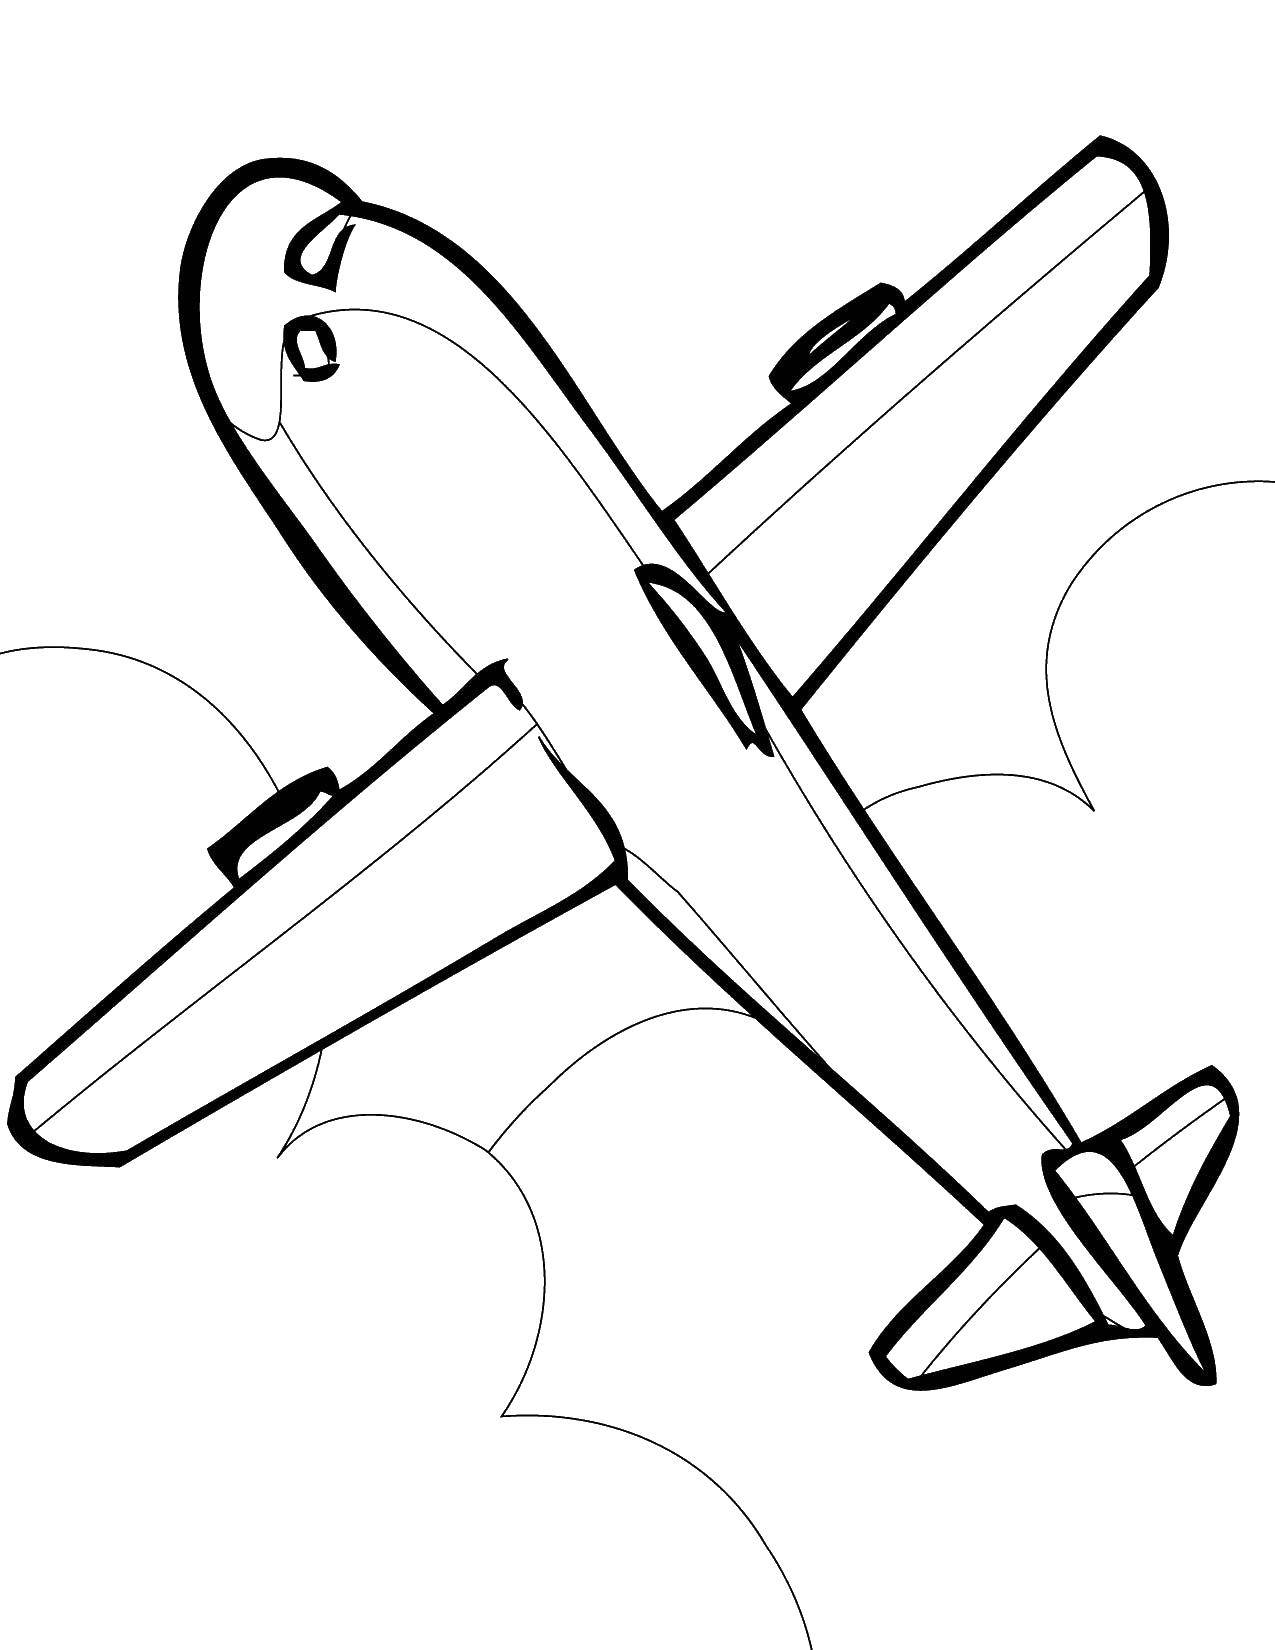 Coloring The plane swoops. Category The planes. Tags:  Plane.